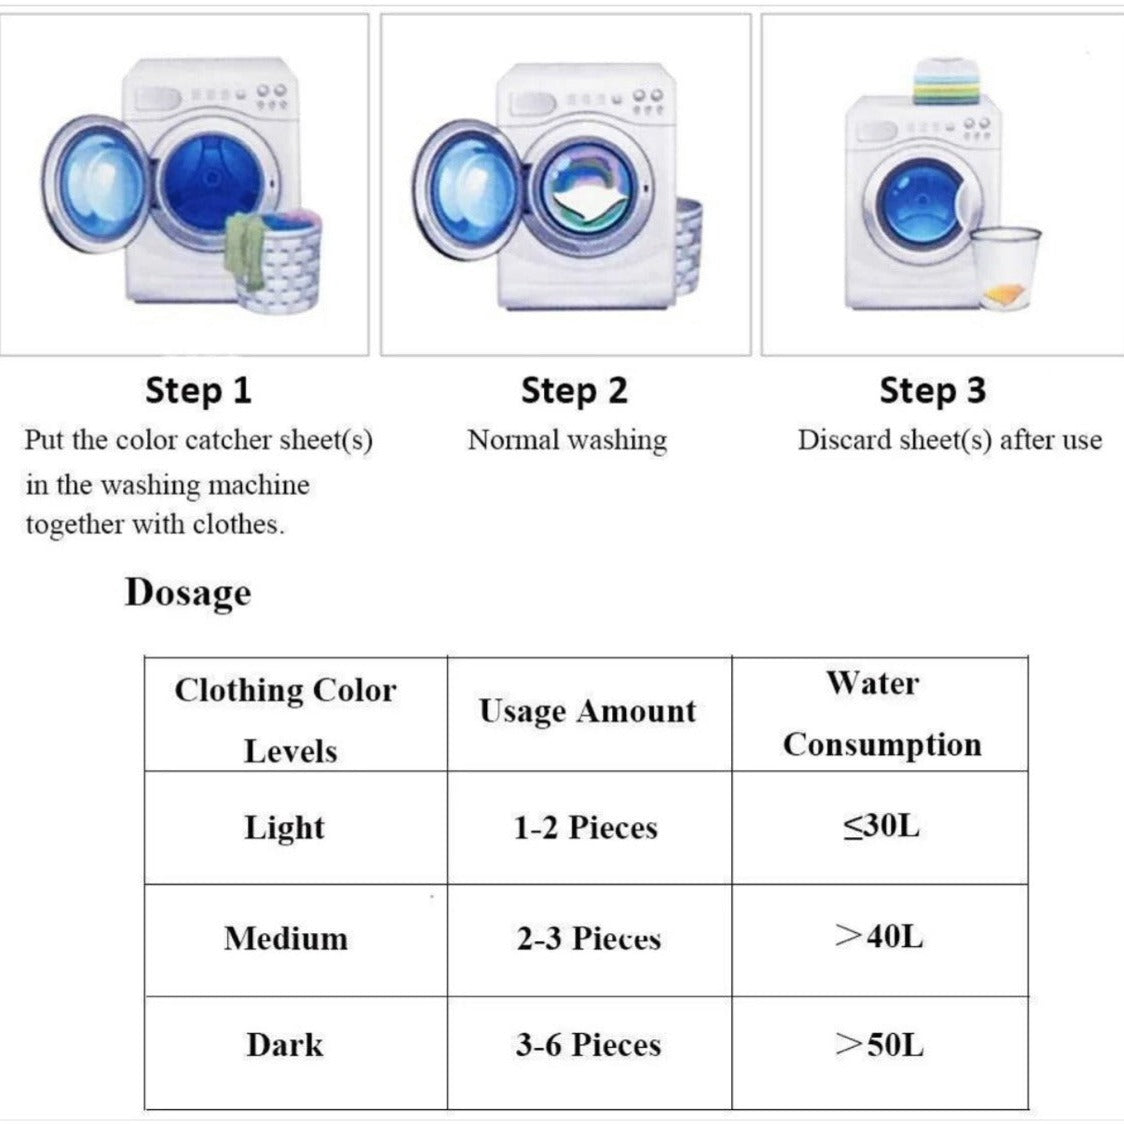 Steps in Using Anti-Staining Laundry Paper.